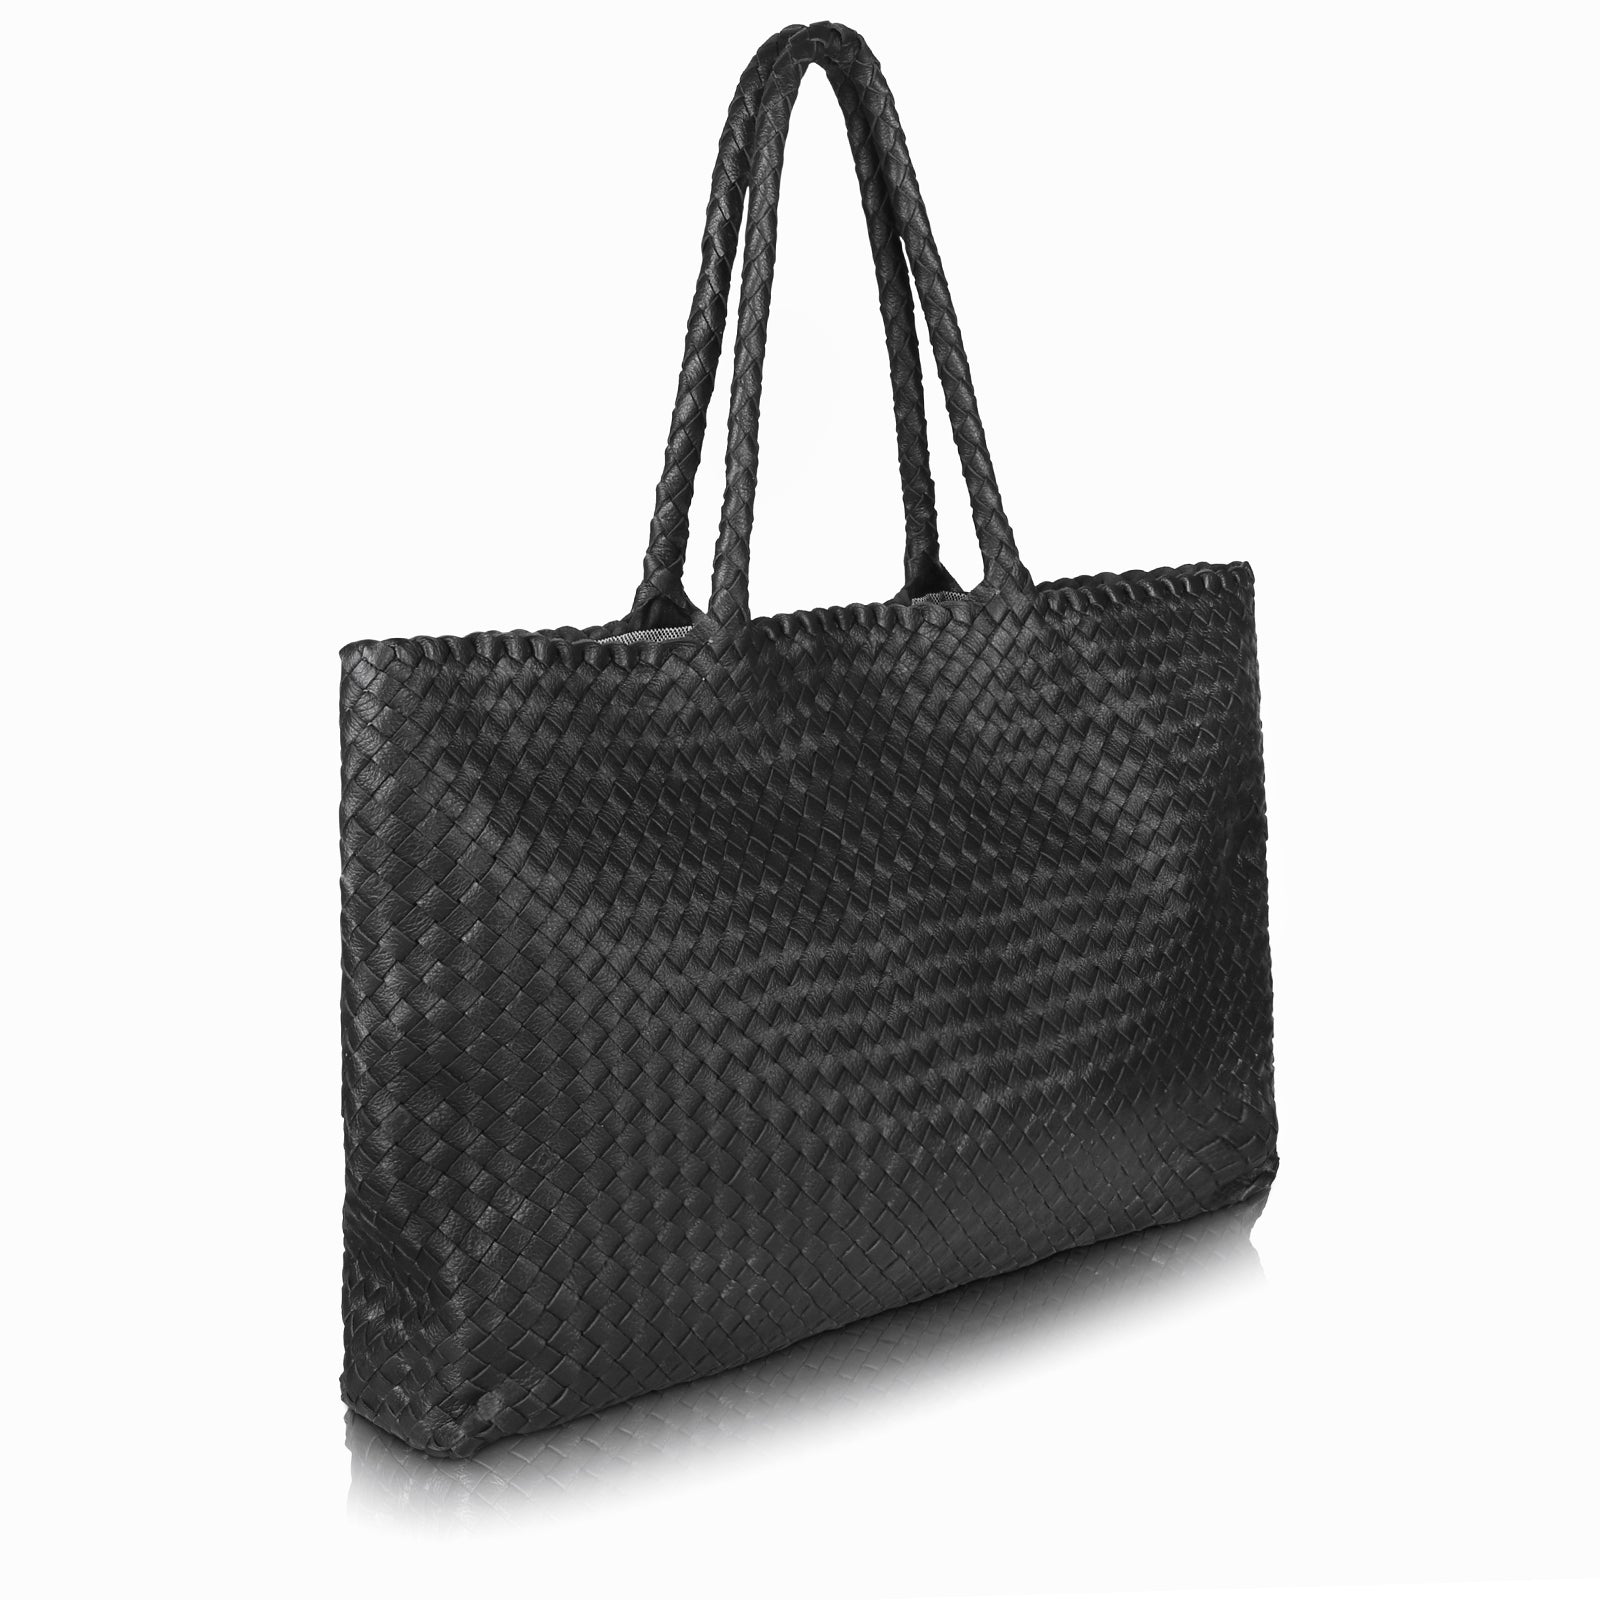 Extra Large Black Leather Tote Bag , Oversized Work and Travel Computer Bag,  Large Shopping Bag, 24 X 15 Handmade in USA 